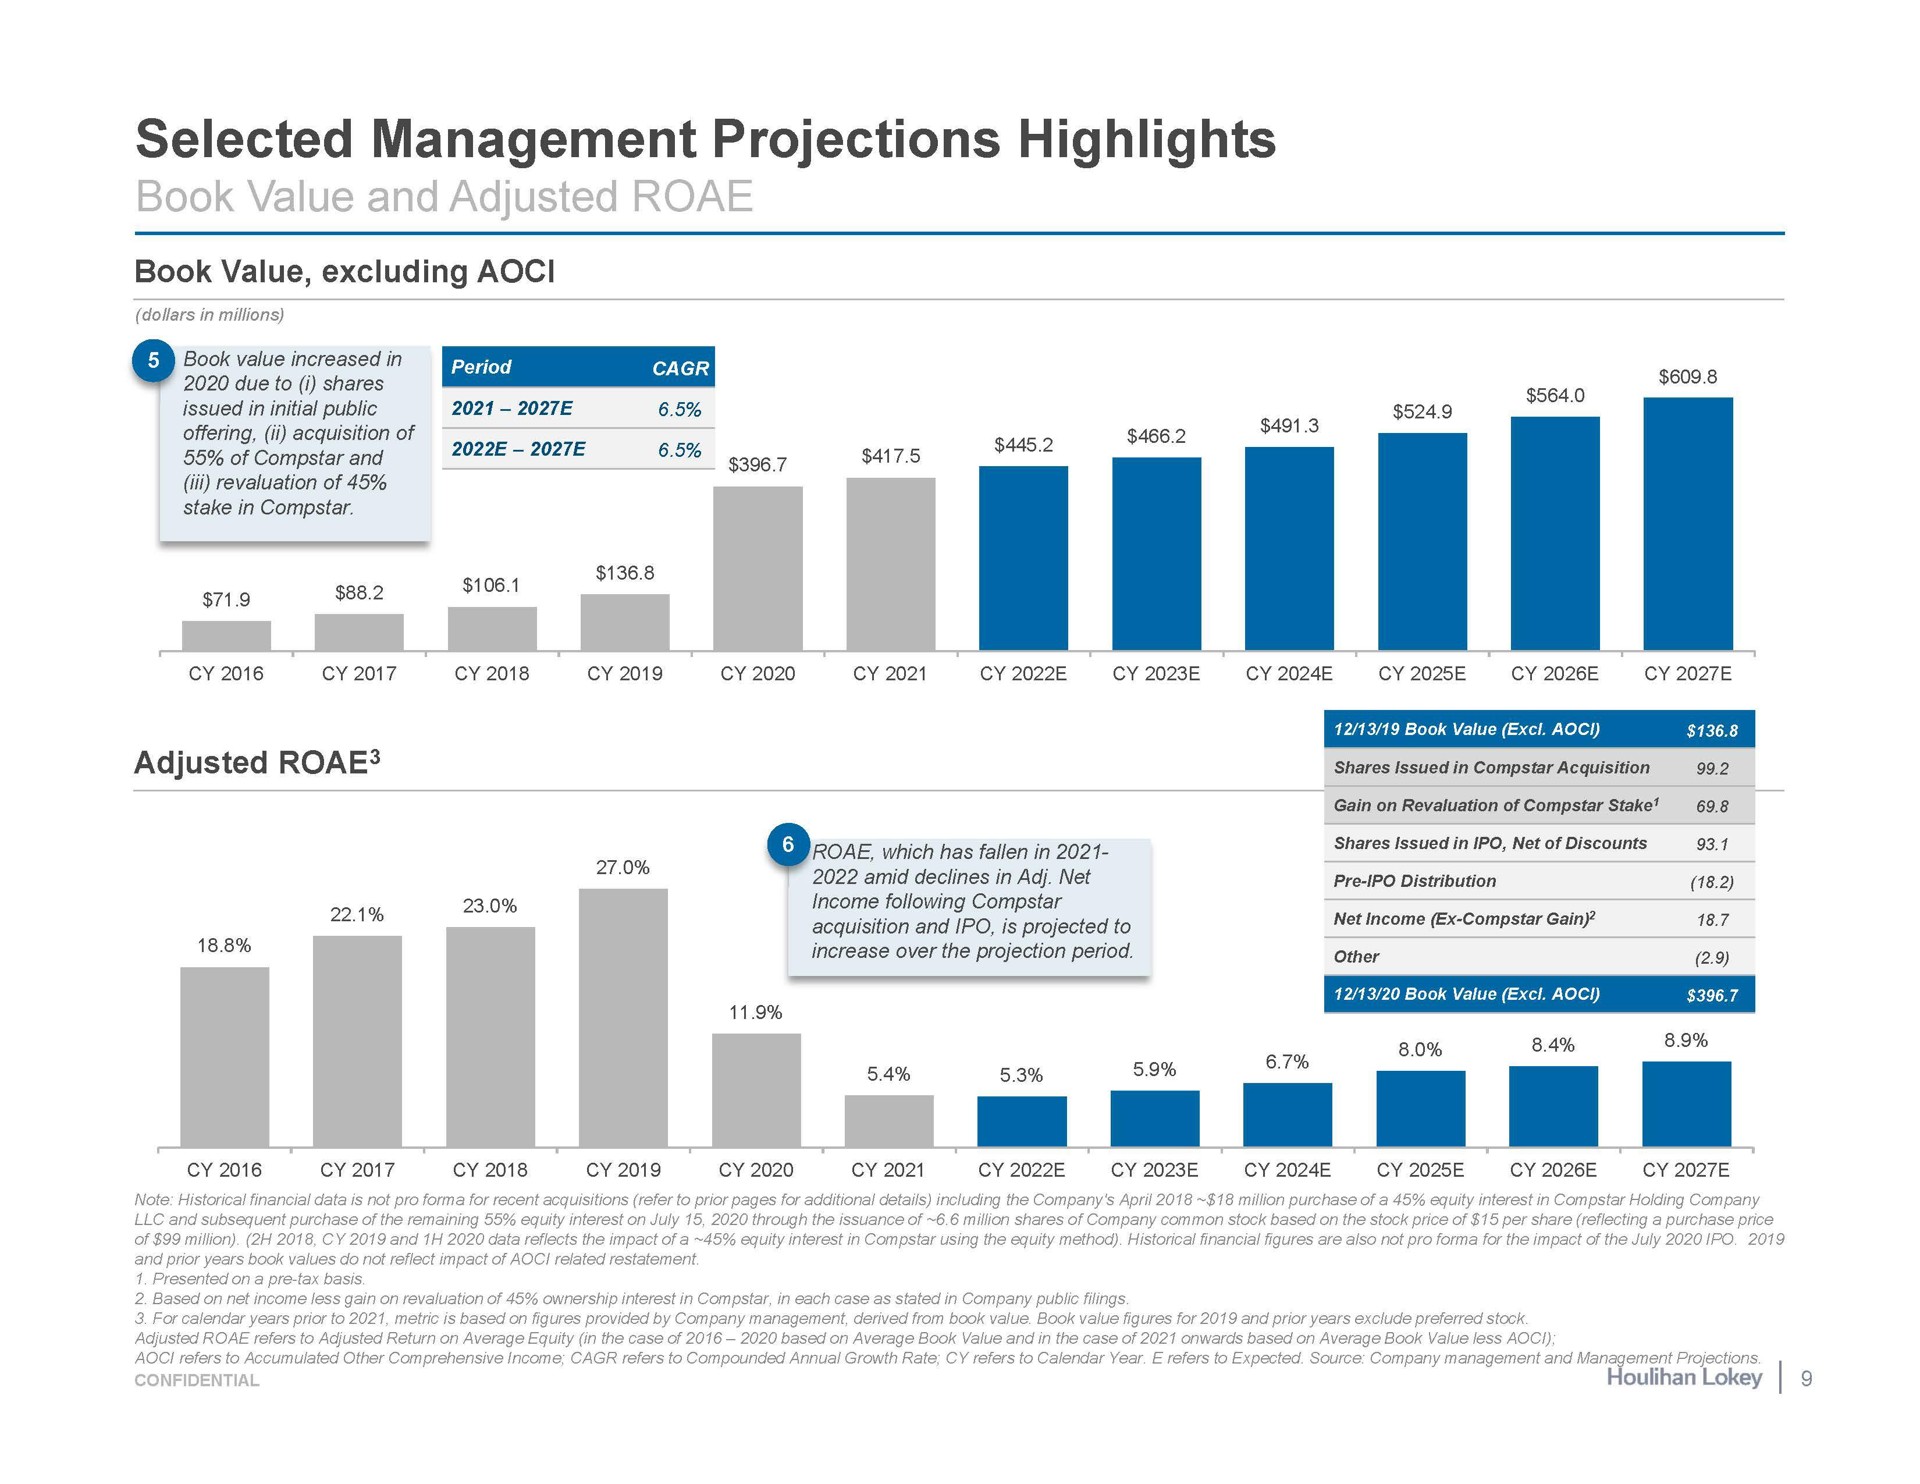 selected management projections highlights book value excluding due to i shares | Houlihan Lokey